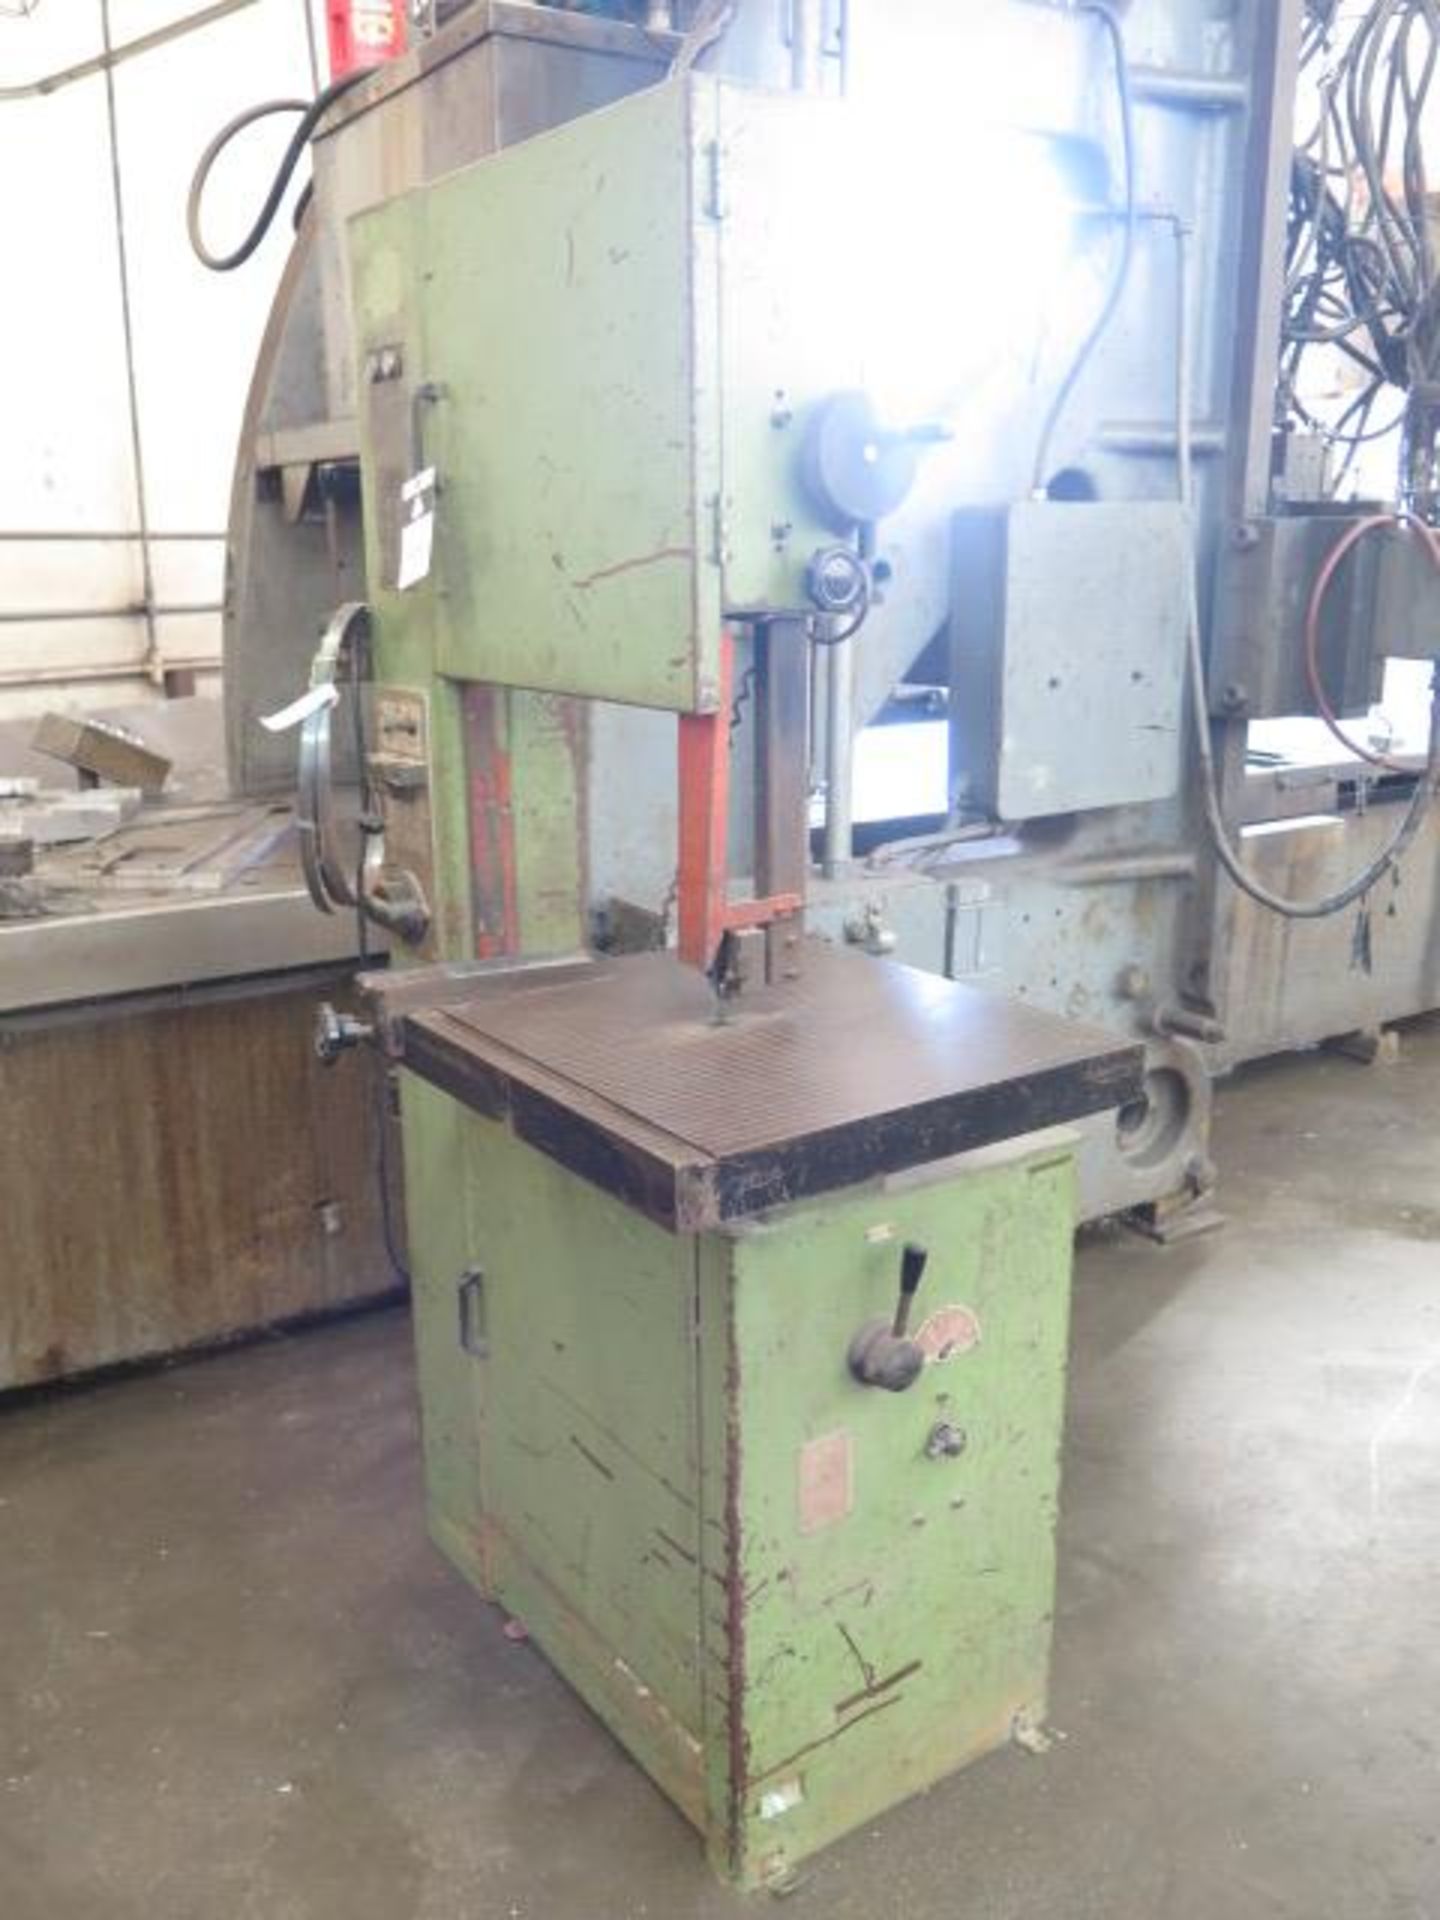 Import 20” Vertical Band Saw w/ Blade Welder, 22” x 23 ½” Table (SOLD AS-IS - NO WARRANTY) - Image 2 of 10